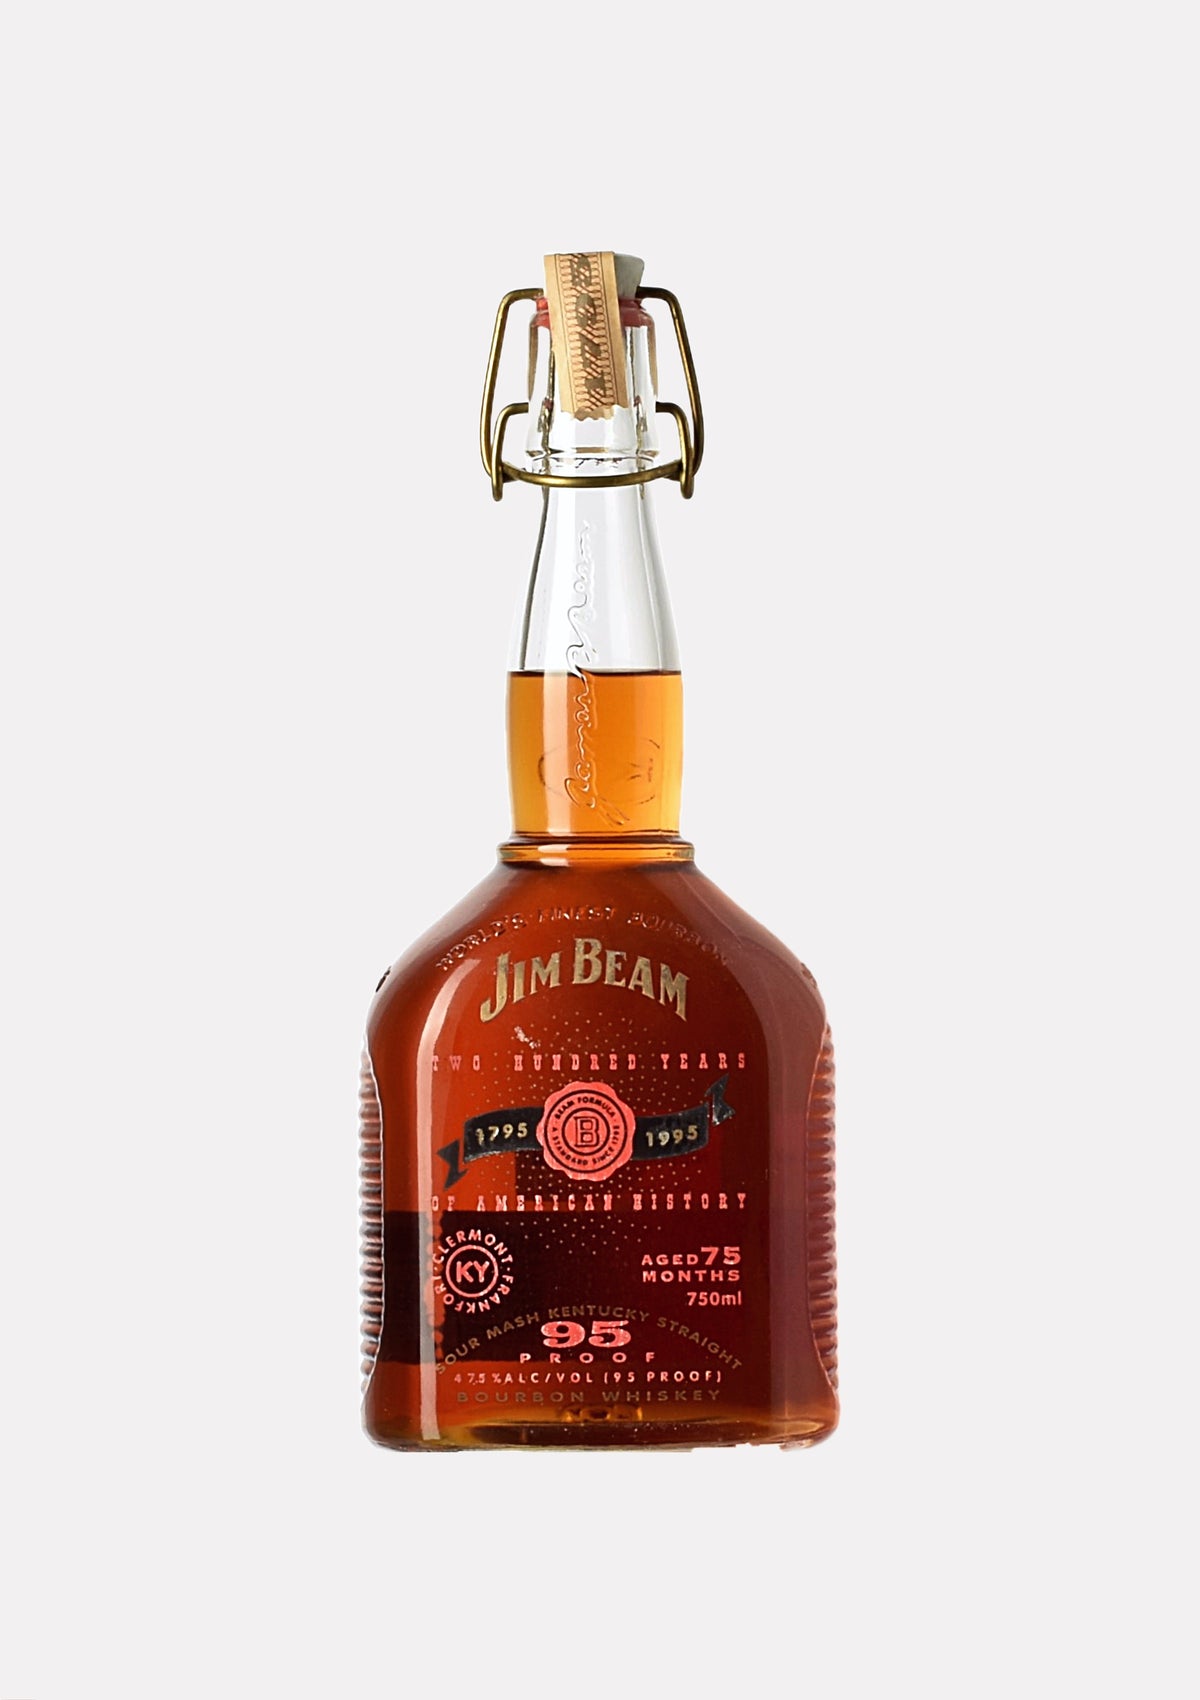 Jim Beam 1795- 1995 200th Anniversary Limited Edition 75 month